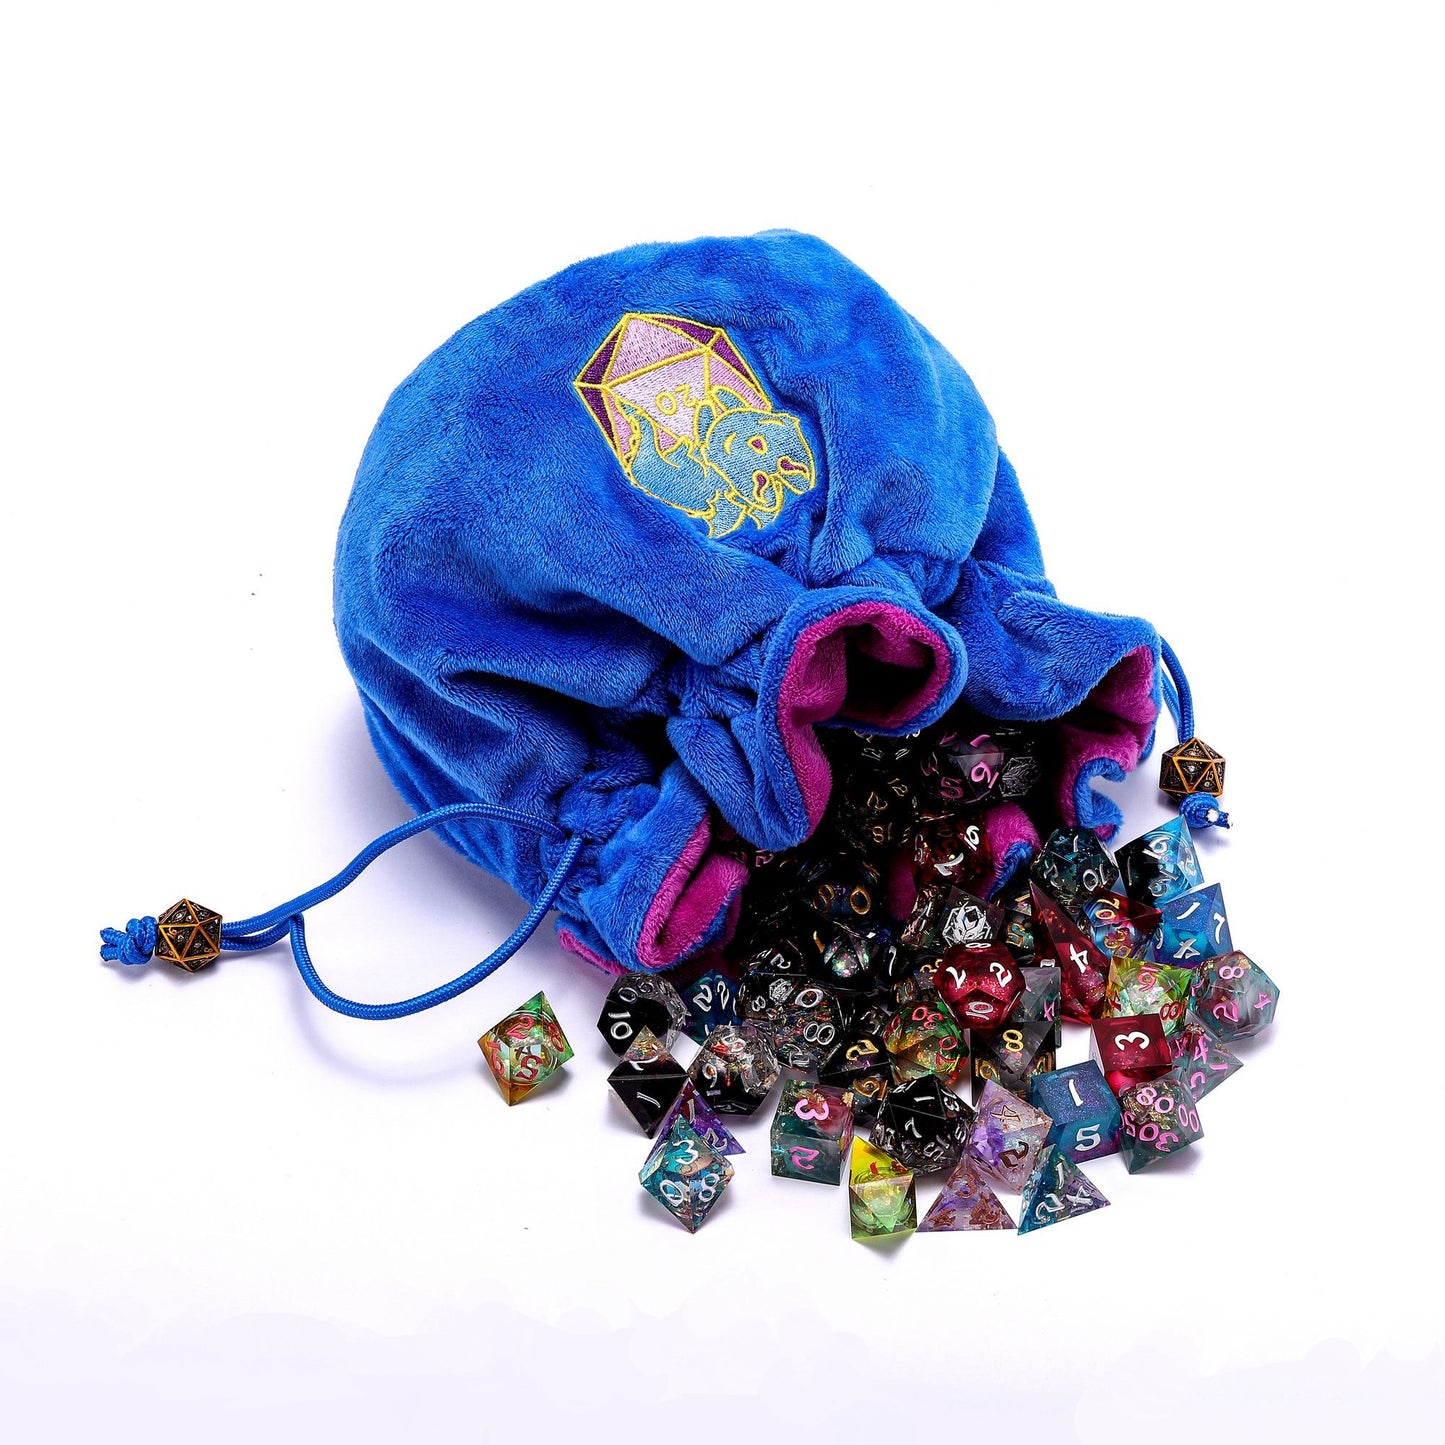 Blue Velvet Compartment Dice Bag with Pockets-Dragon with D20